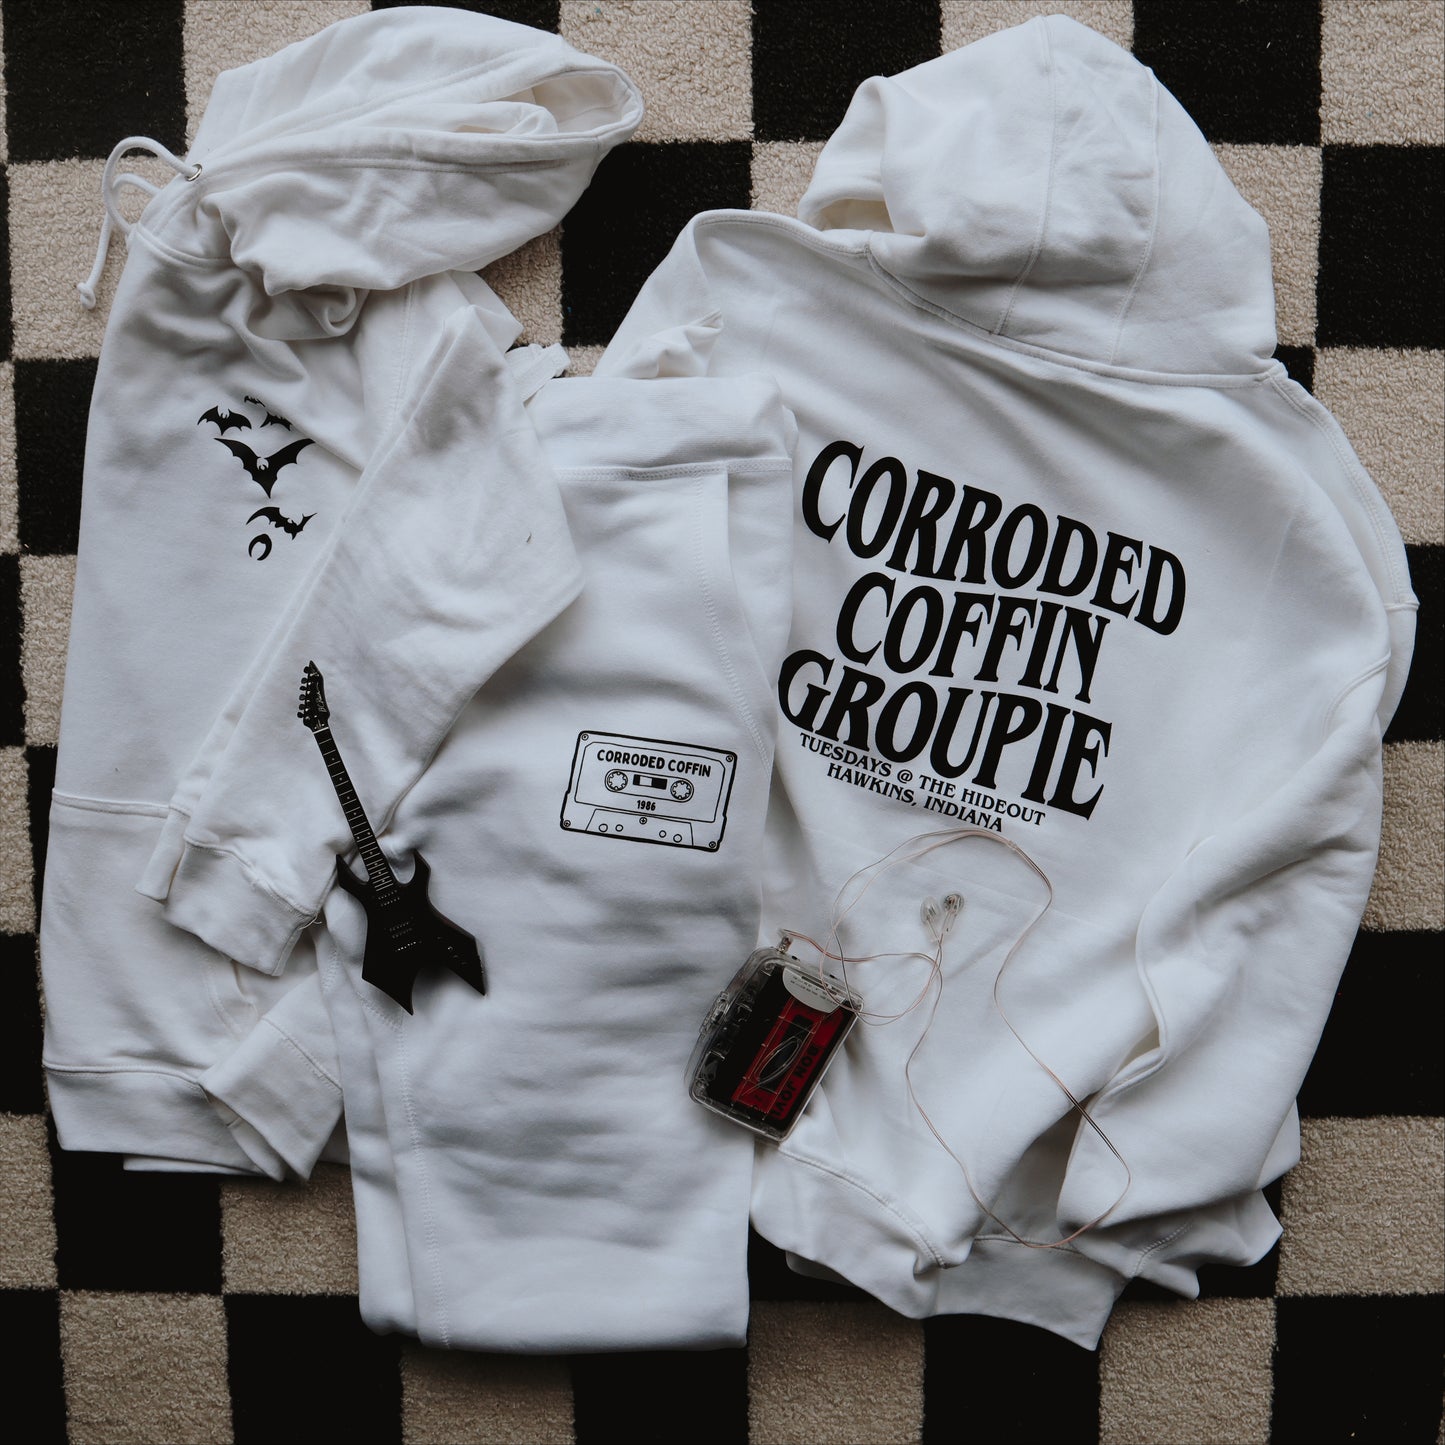 Corroded Coffin Band Joggers